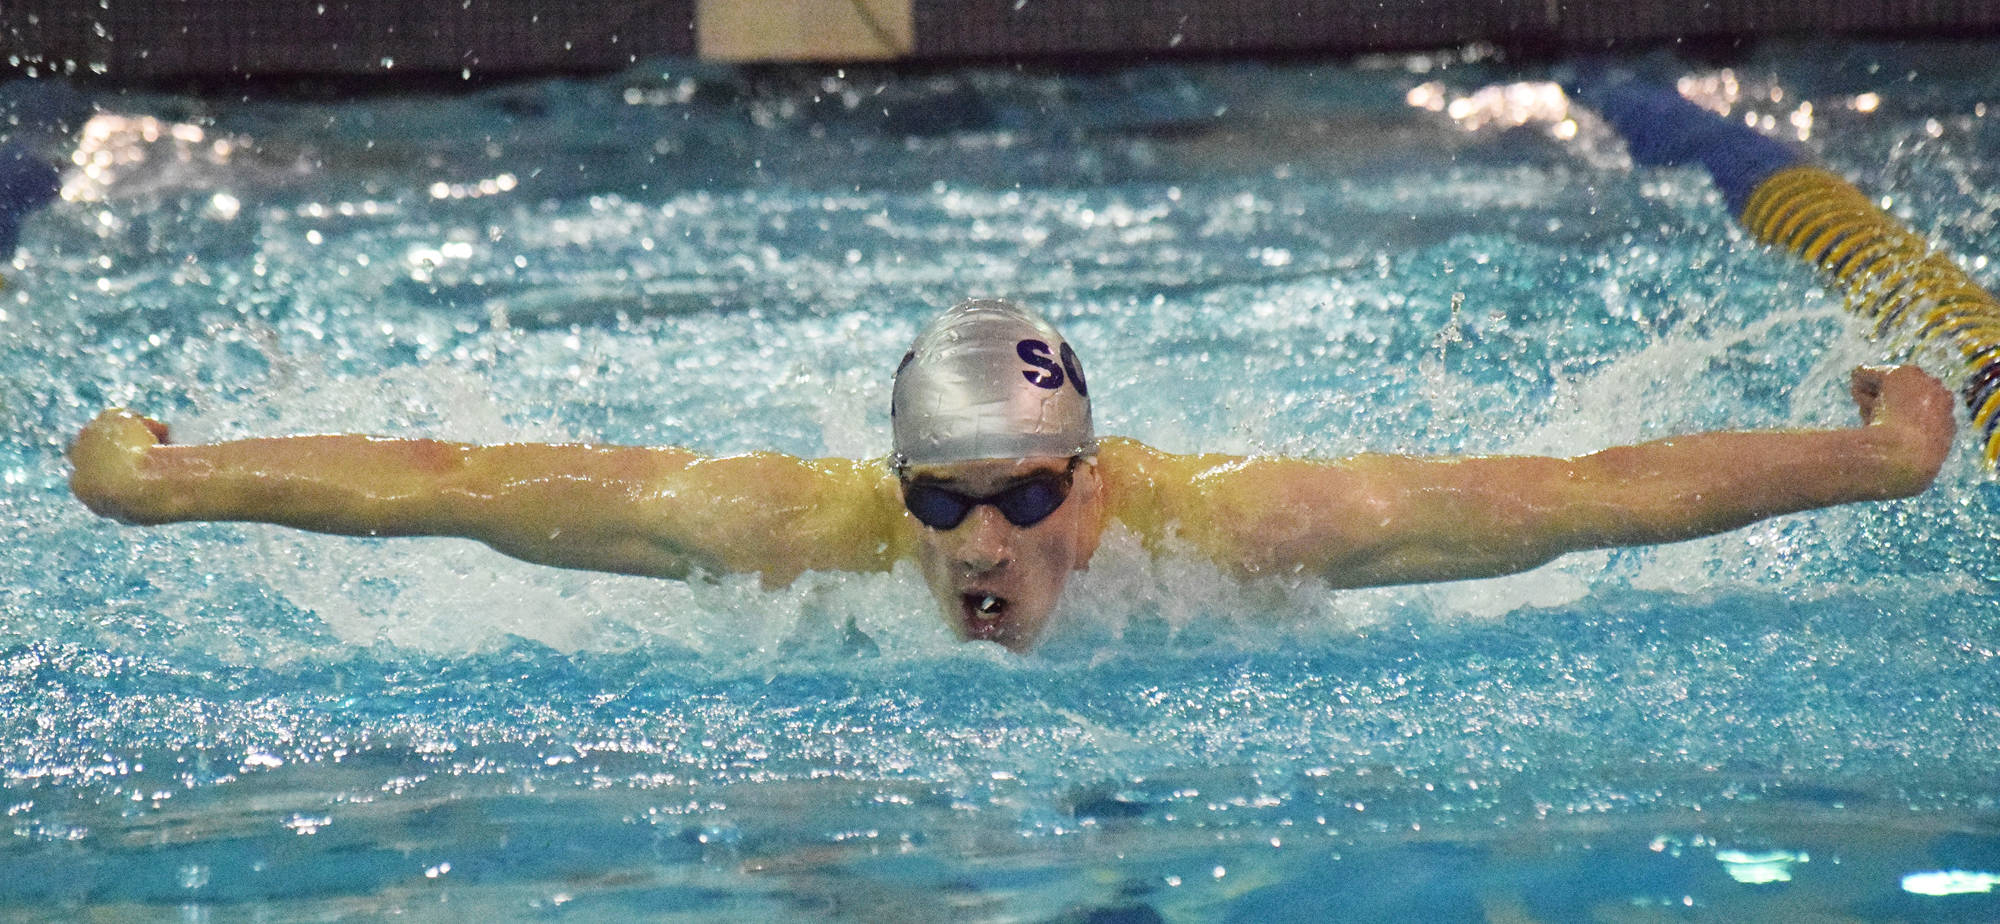 Soldotna’s Ethan Evans competes in the boys 100-yard butterfly final Saturday, Oct. 27, 2018 at the Northern Lights Conference championship swim meet at Homer High School in Homer, Alaska. (Photo by Joey Klecka/Peninsula Clarion)